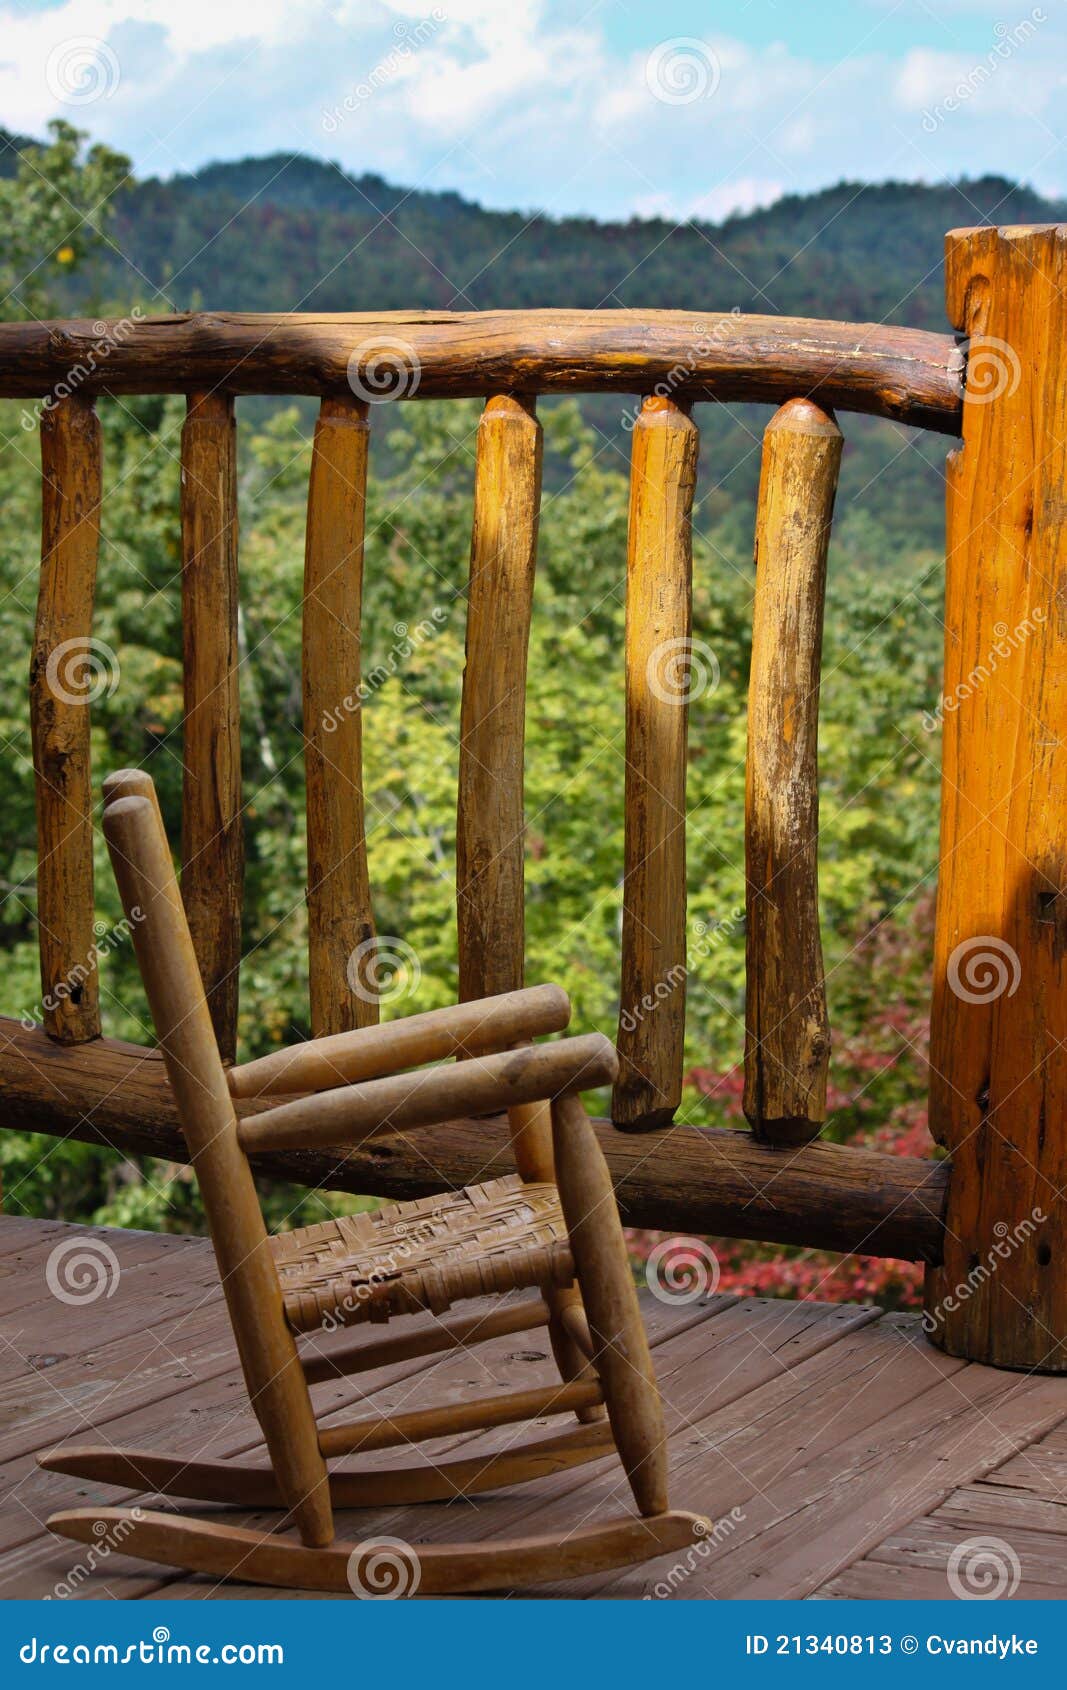 child-size outdoor rocking chair wnc mountains